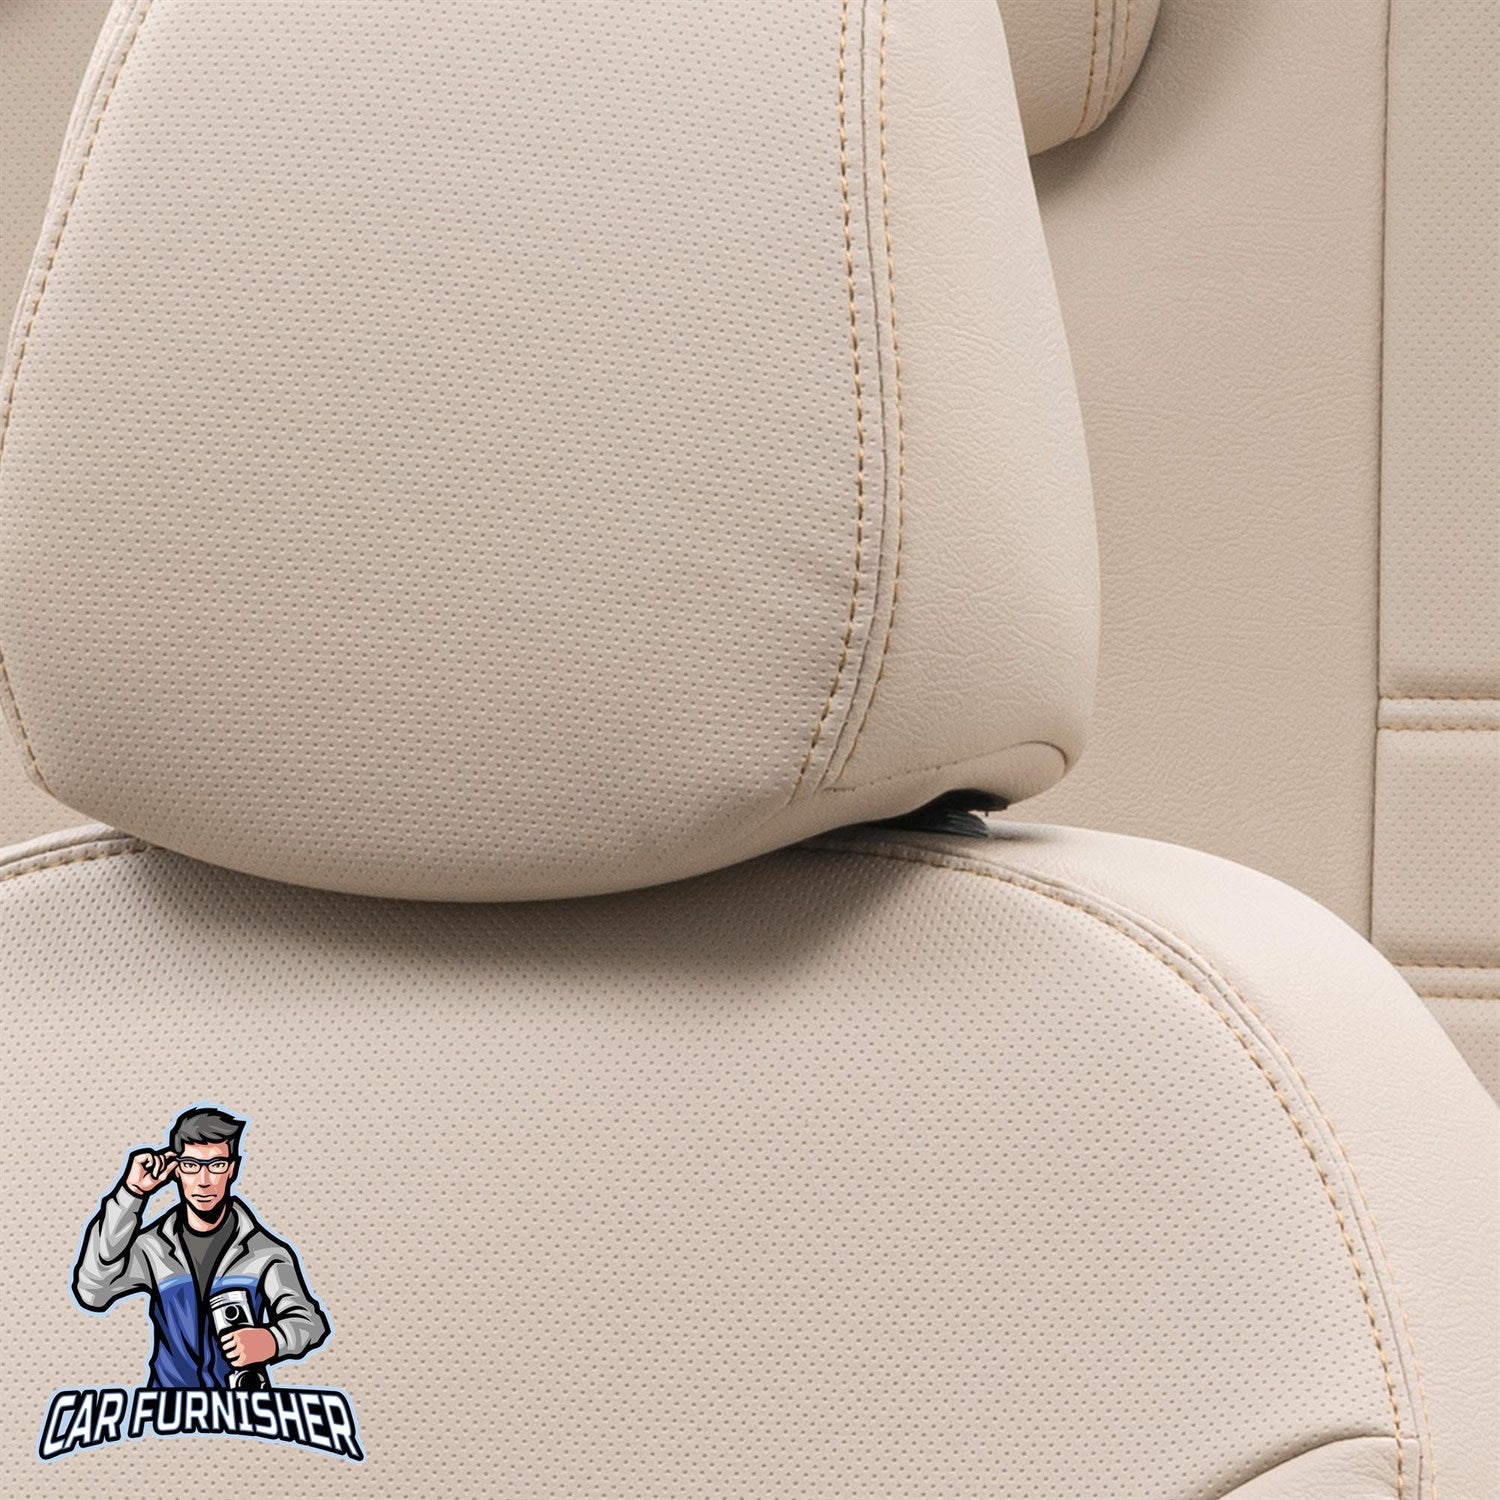 Mercedes Atego Seat Covers Istanbul Leather Design Beige Leather